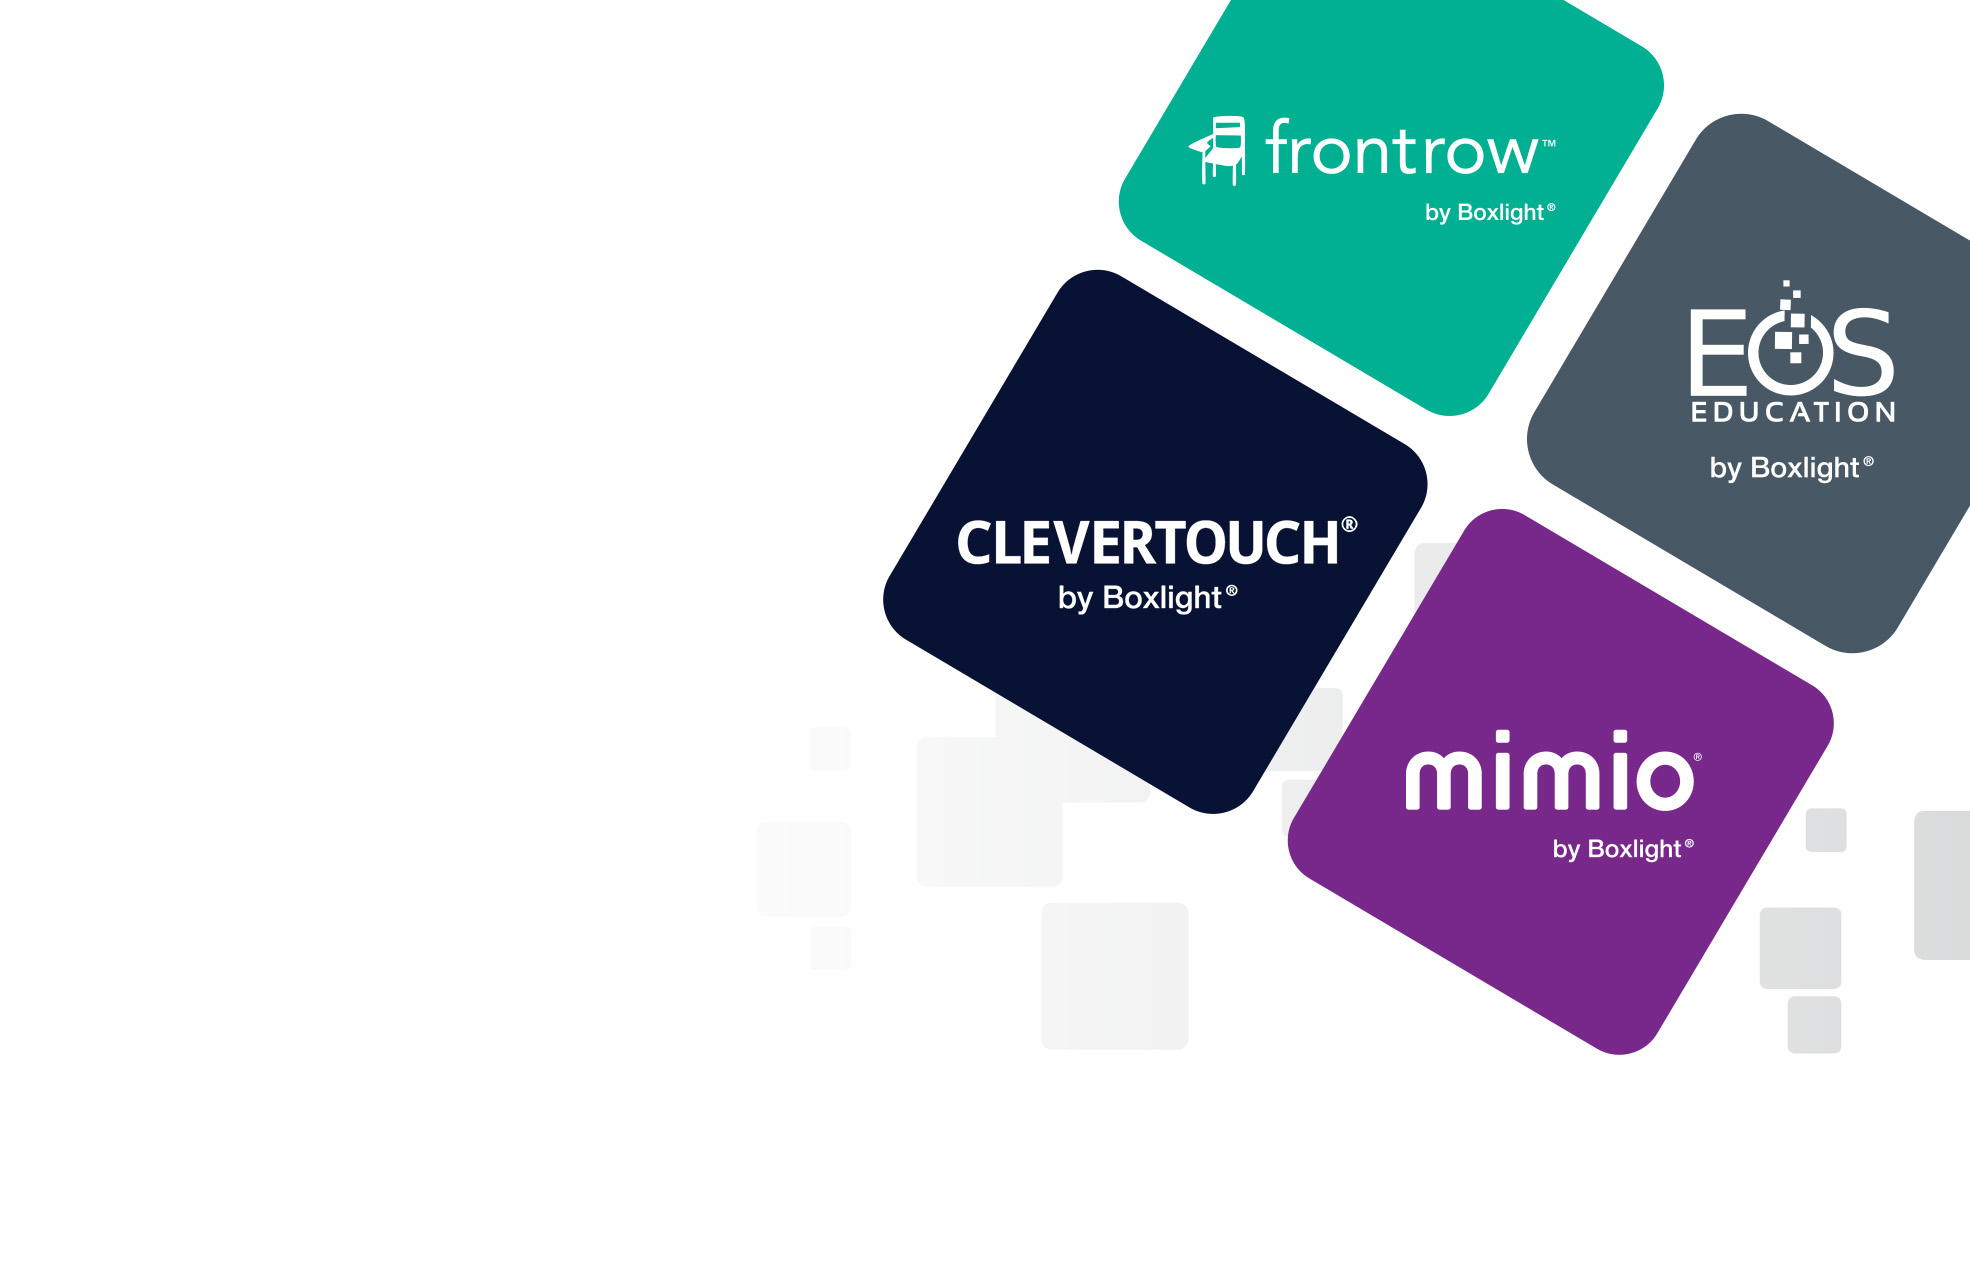 Frontrow logo in a green square, EOS education logo in a blue square, Mimio by boxlight logo in a purple square and clevertouch technologies logo in a navy square. All squares rotated 45 degrees and arranged to make a large square at 45 degrees in the top right corner